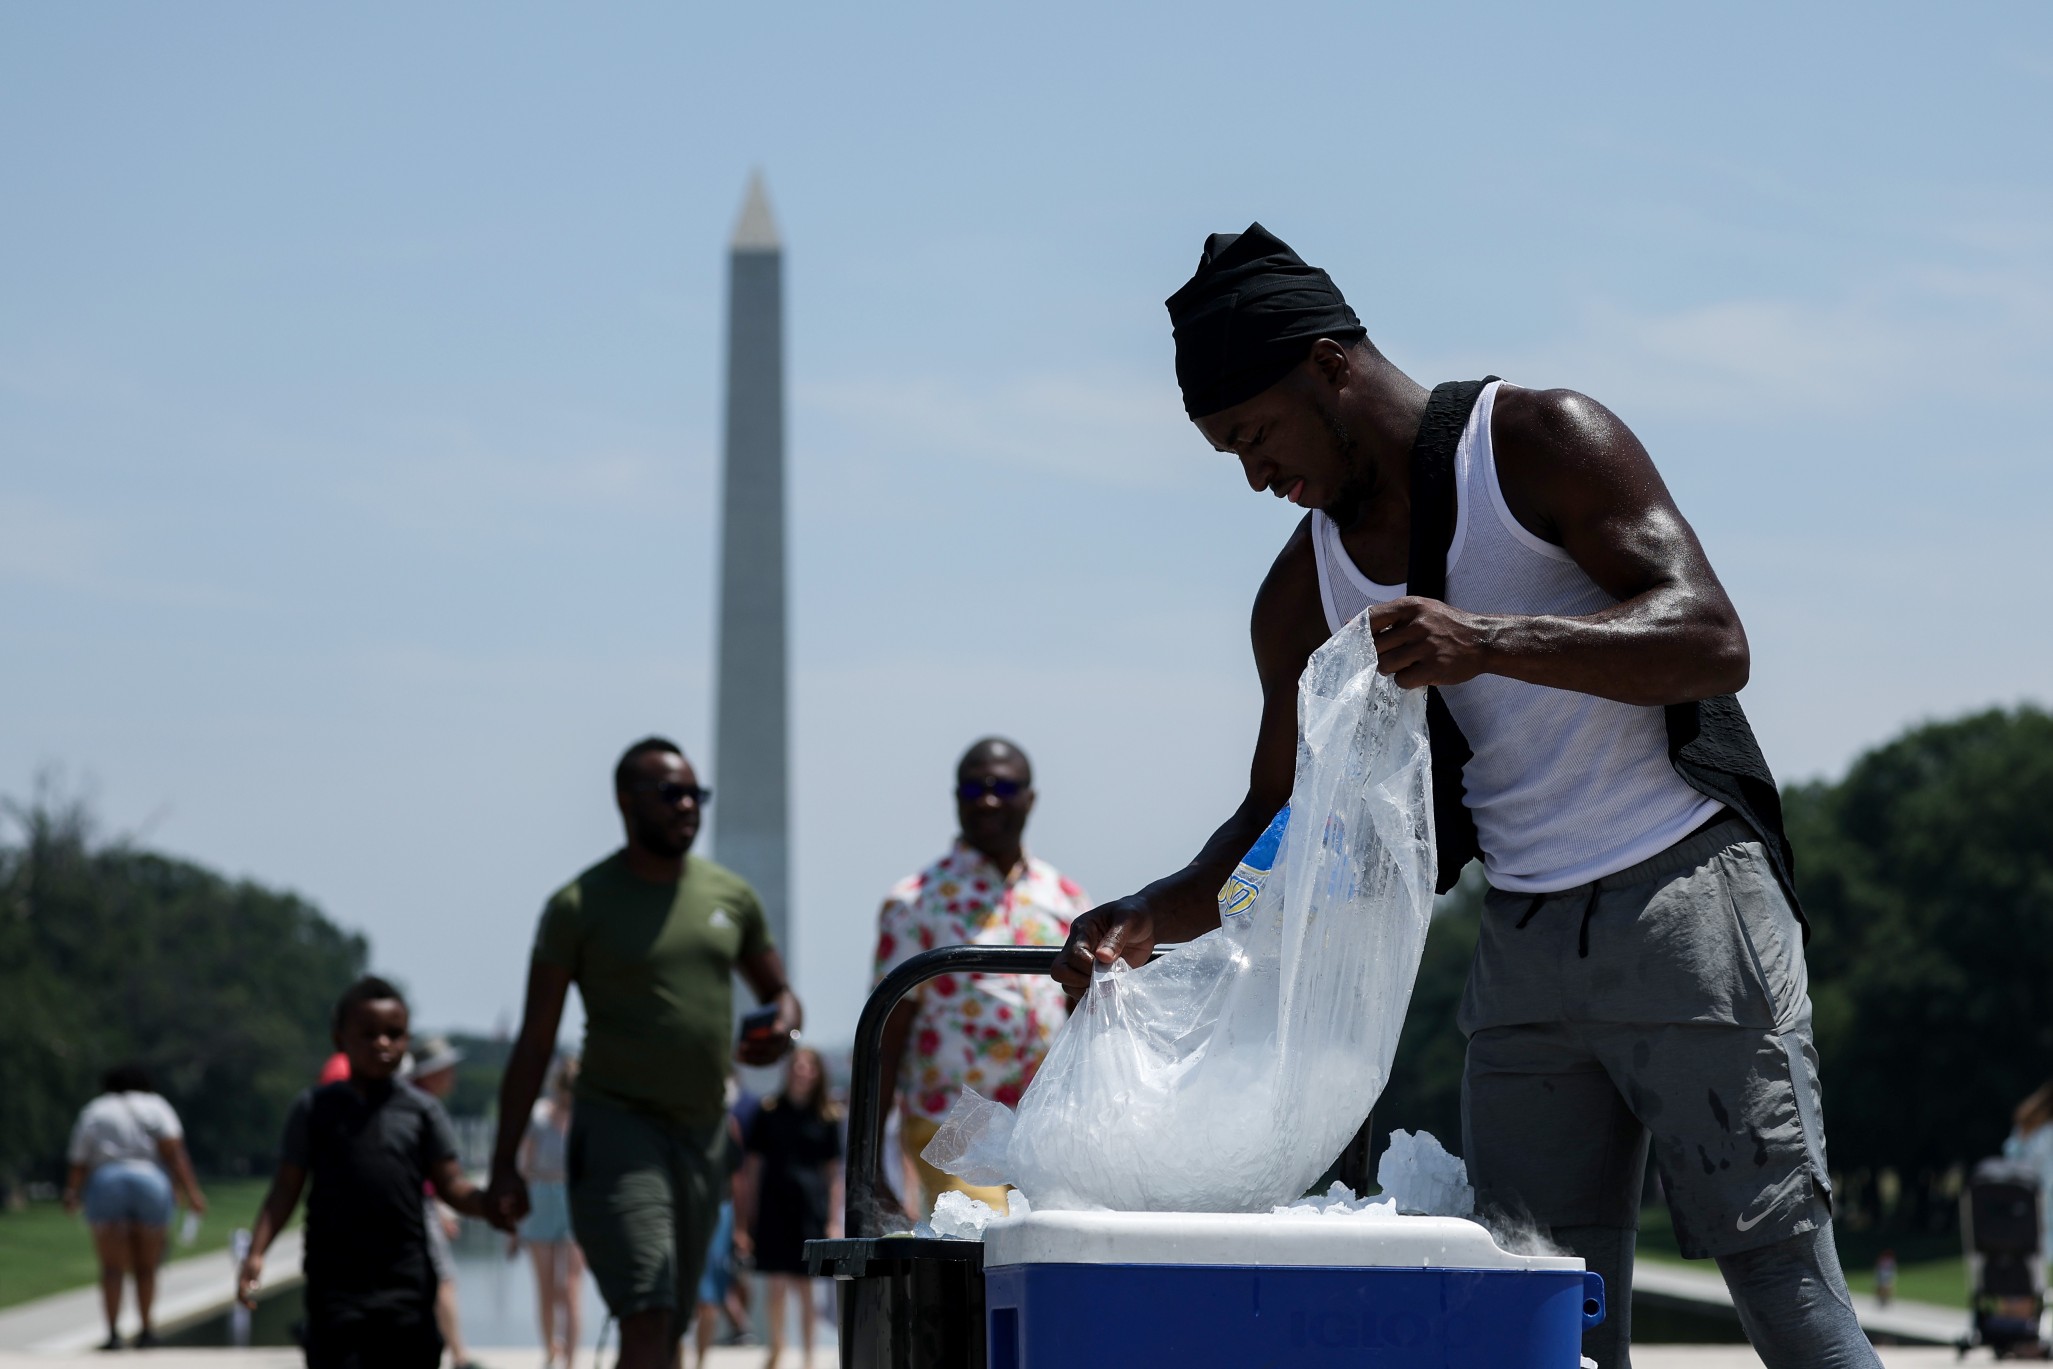 Large Swathes Of U.S. Under Excessive Heat Warnings